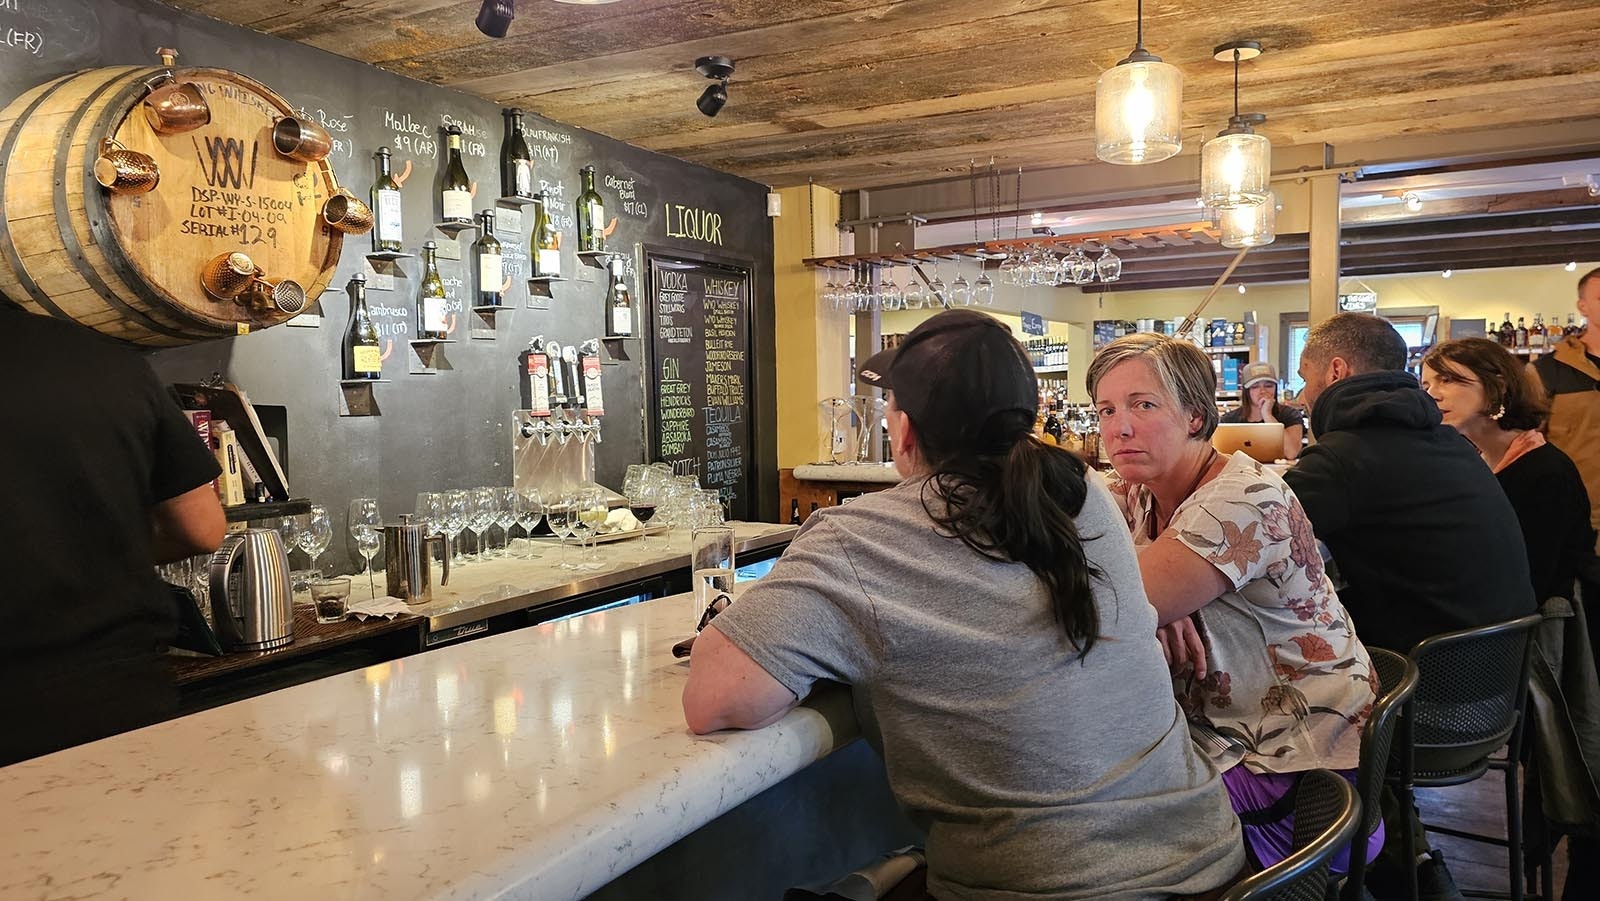 A dozen or so wines are also available by the glass at Bin22 in Jackson, which can be a good way to try out new wines before committing to an entire bottle.